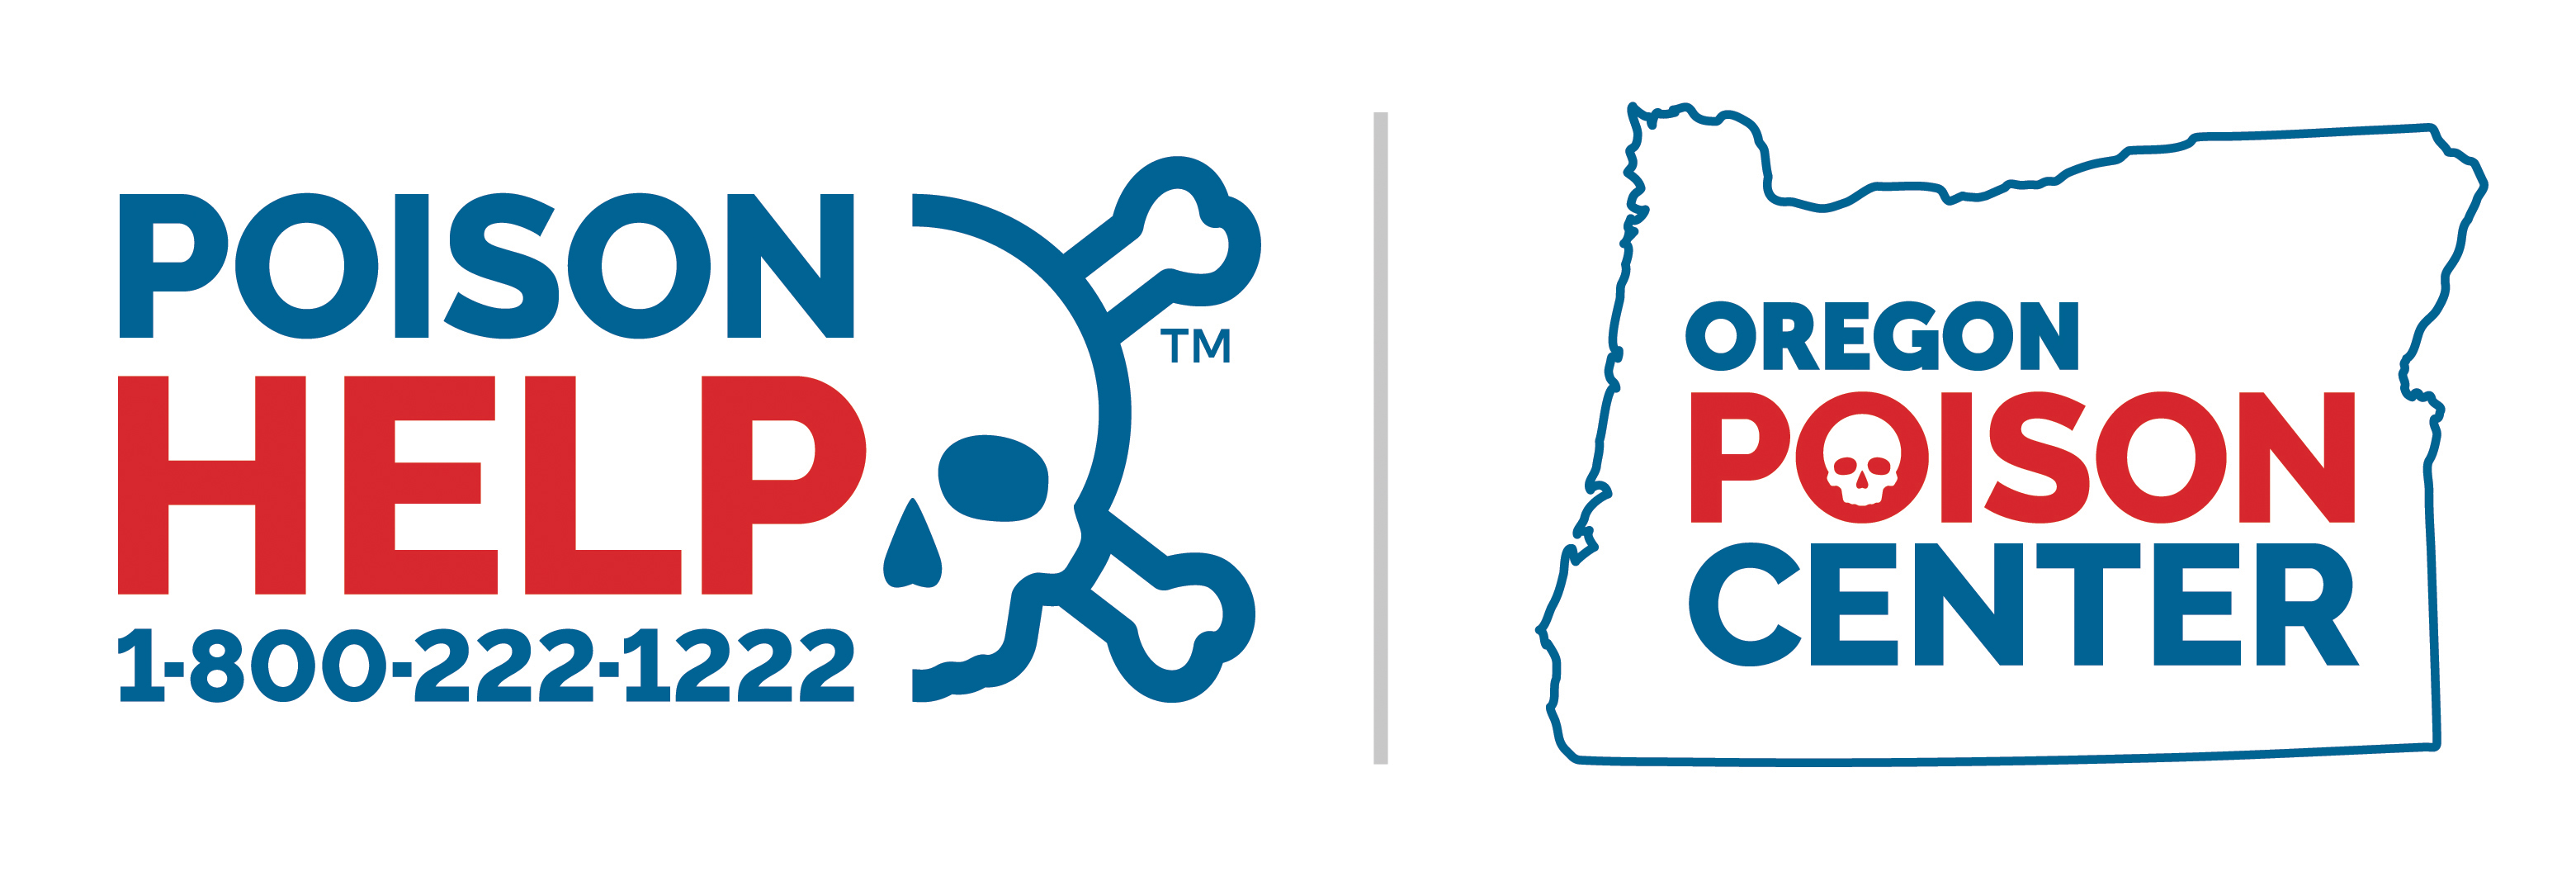 The Oregon Poison Center logo is framed by the state of Oregon outline and accompanied by the Poison Help hotline: 1-800-222-1222